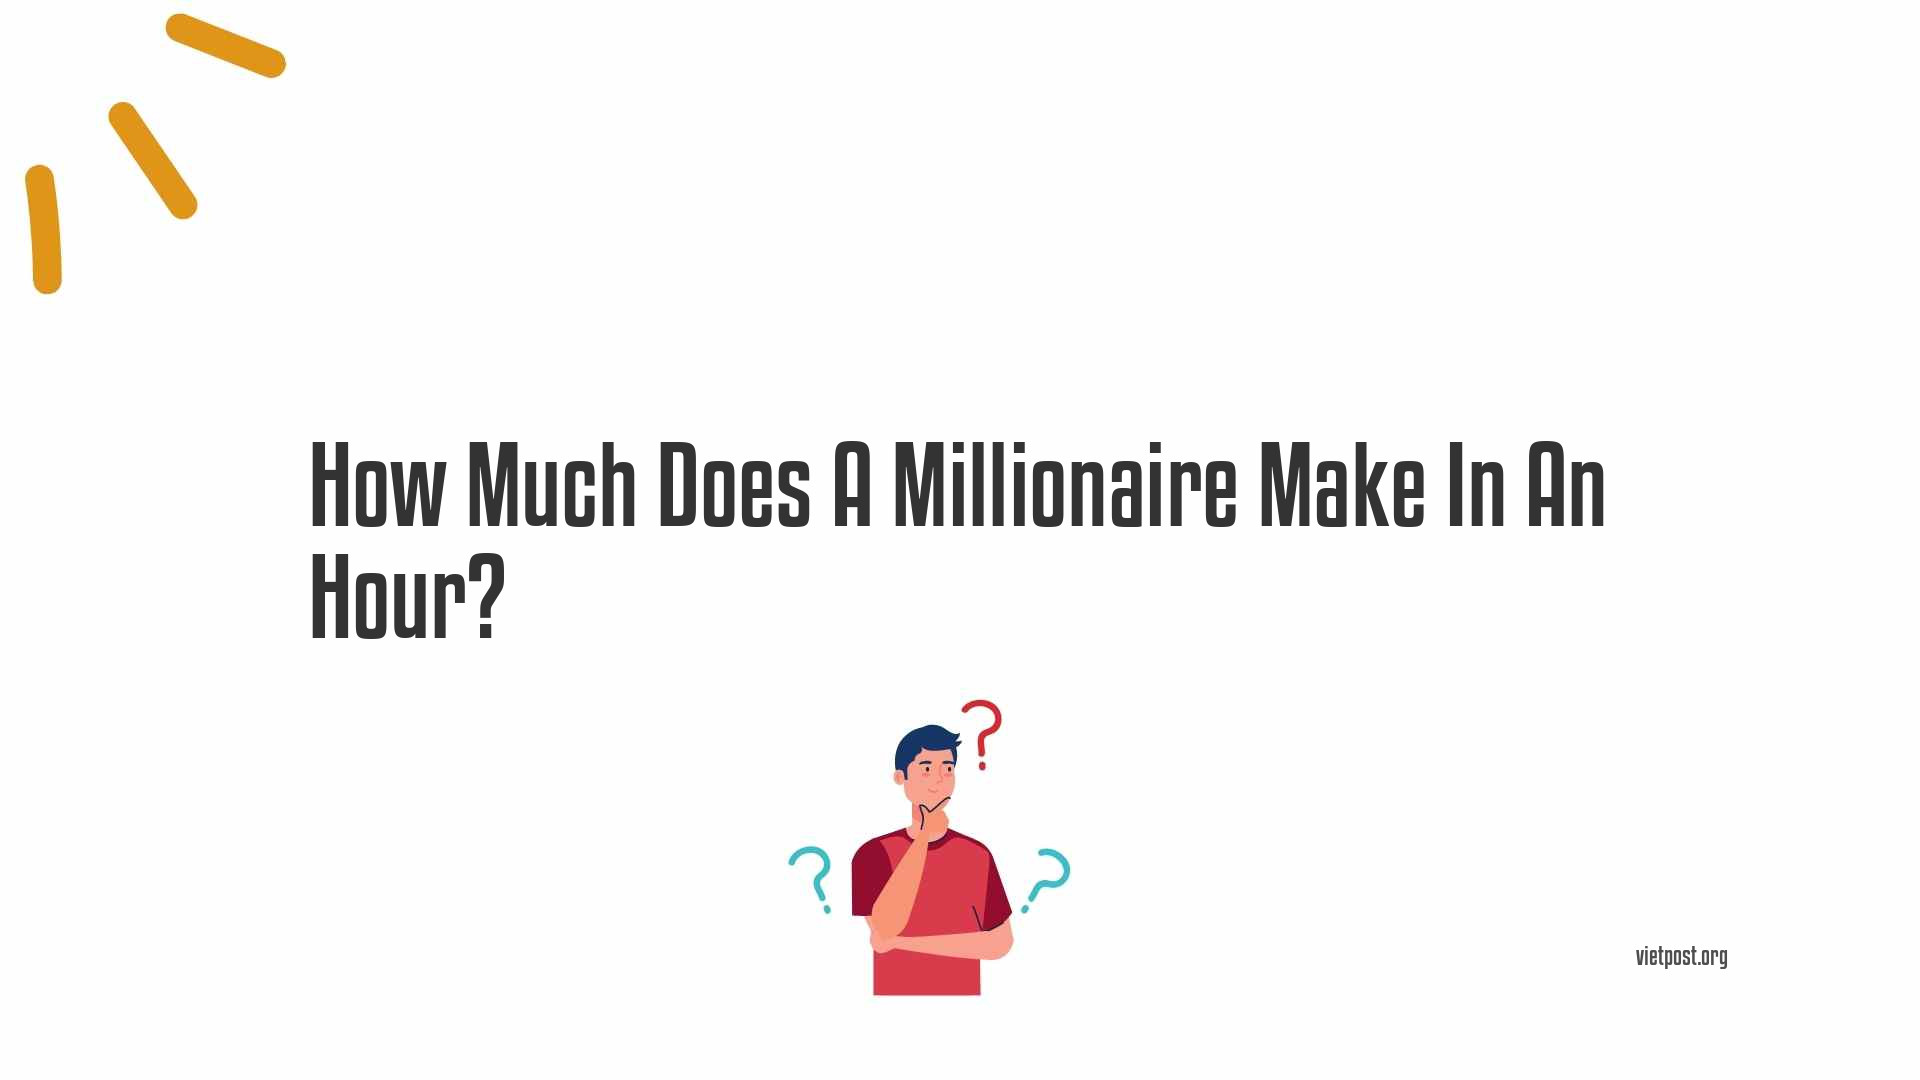 How Much Does A Millionaire Make In An Hour?